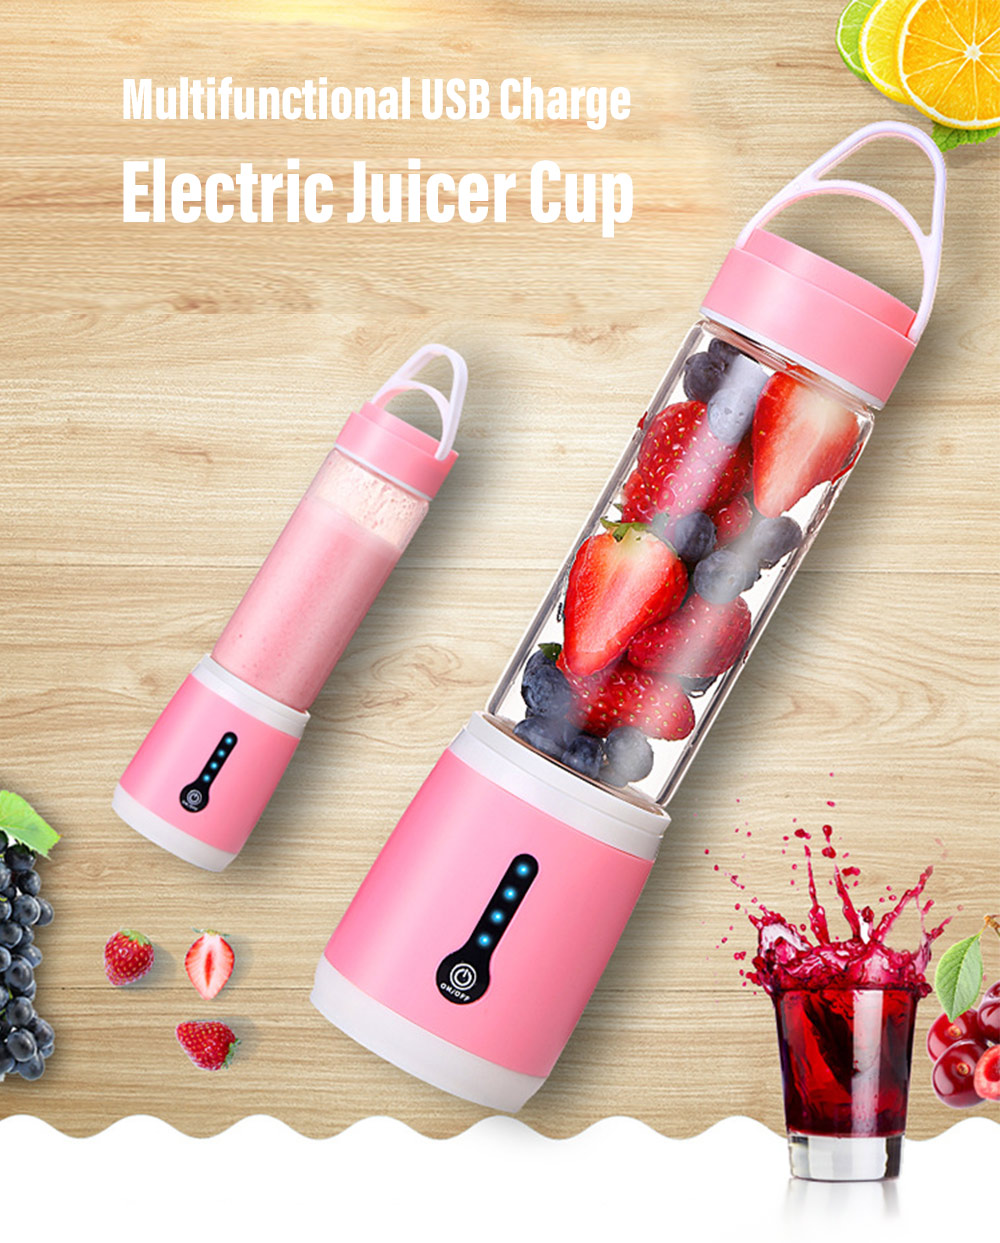 USB Charge Portable Electric Juicer Cup